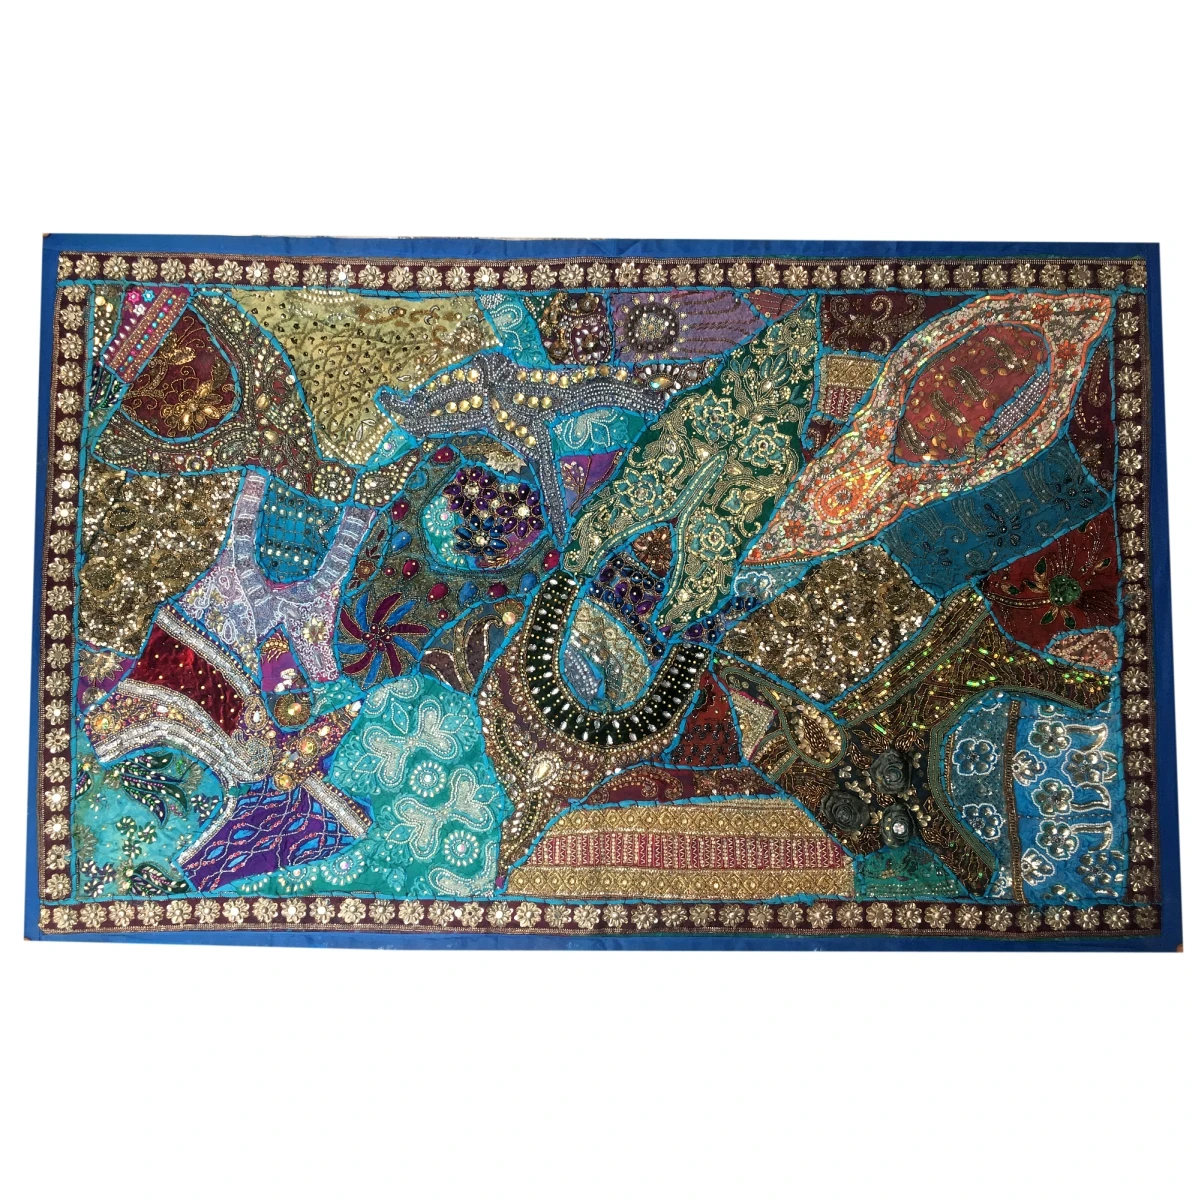 Vintage Hand Embroidered Patchwork Cotton Thread Work Wall Tapestry